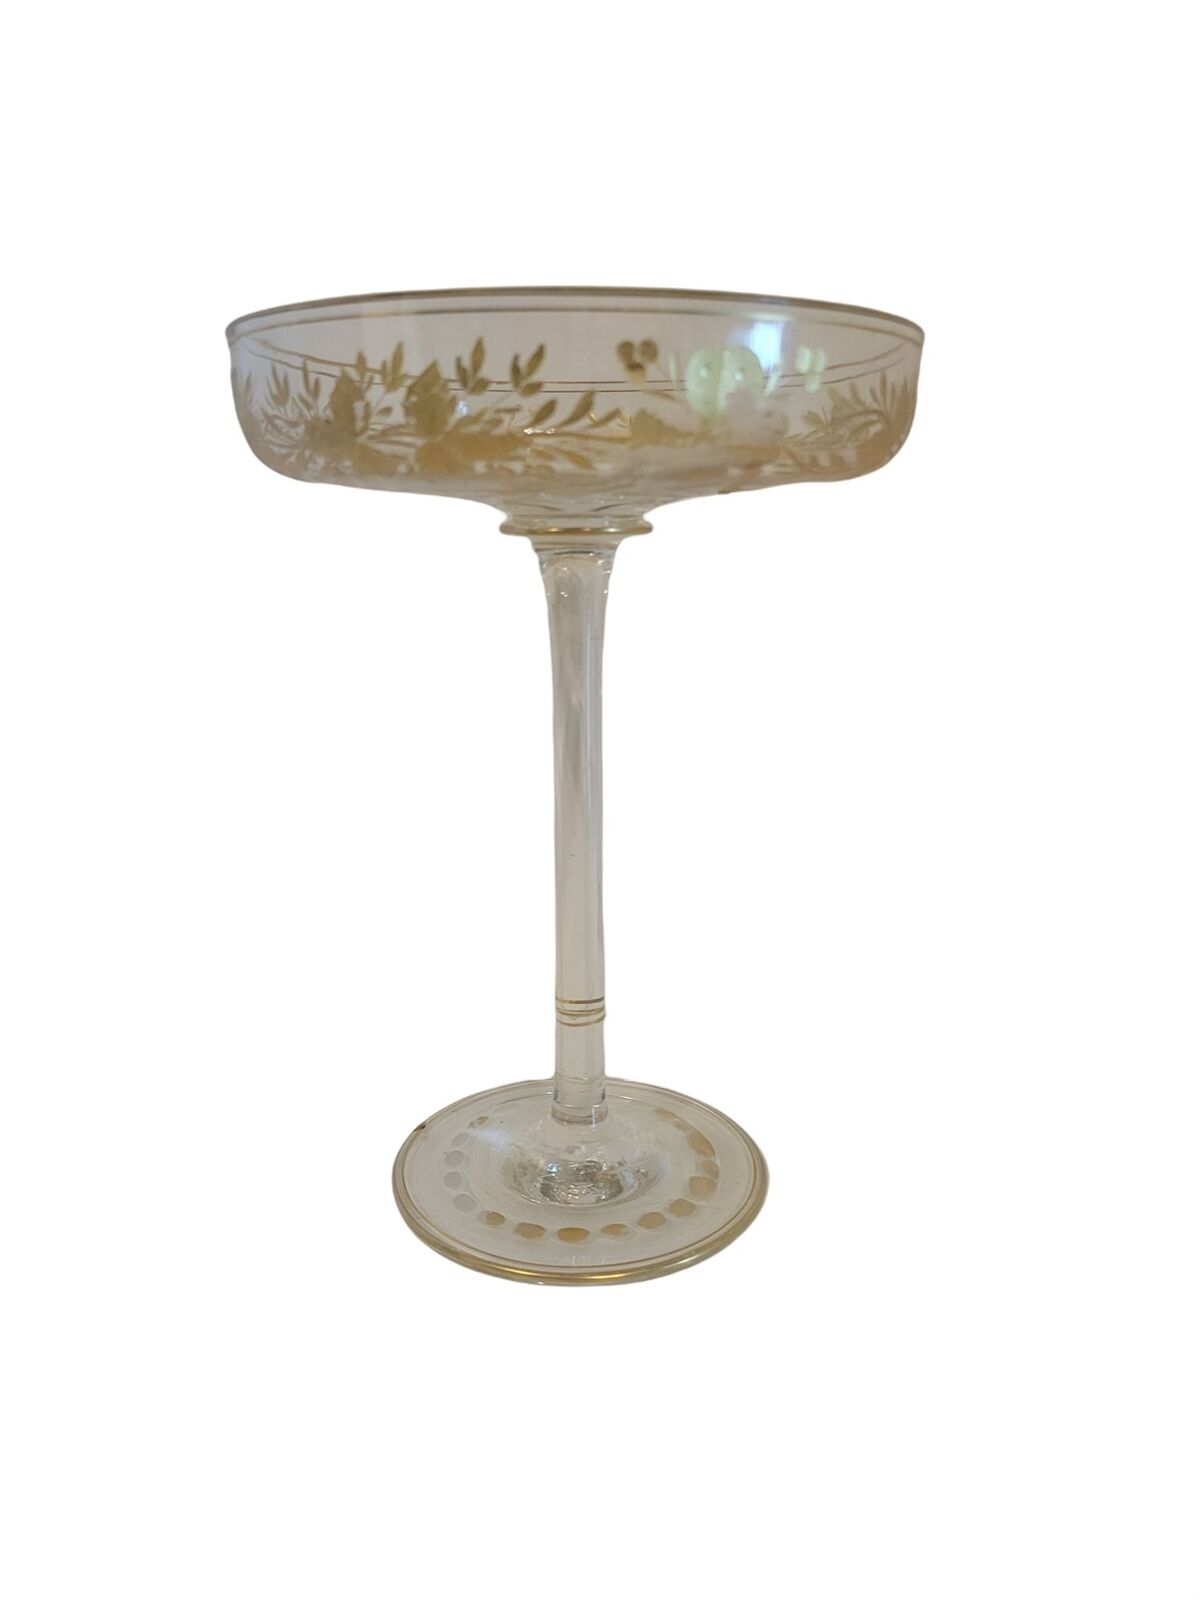 Vintage Tall Hand Painted Floral Crystal Glass Compote